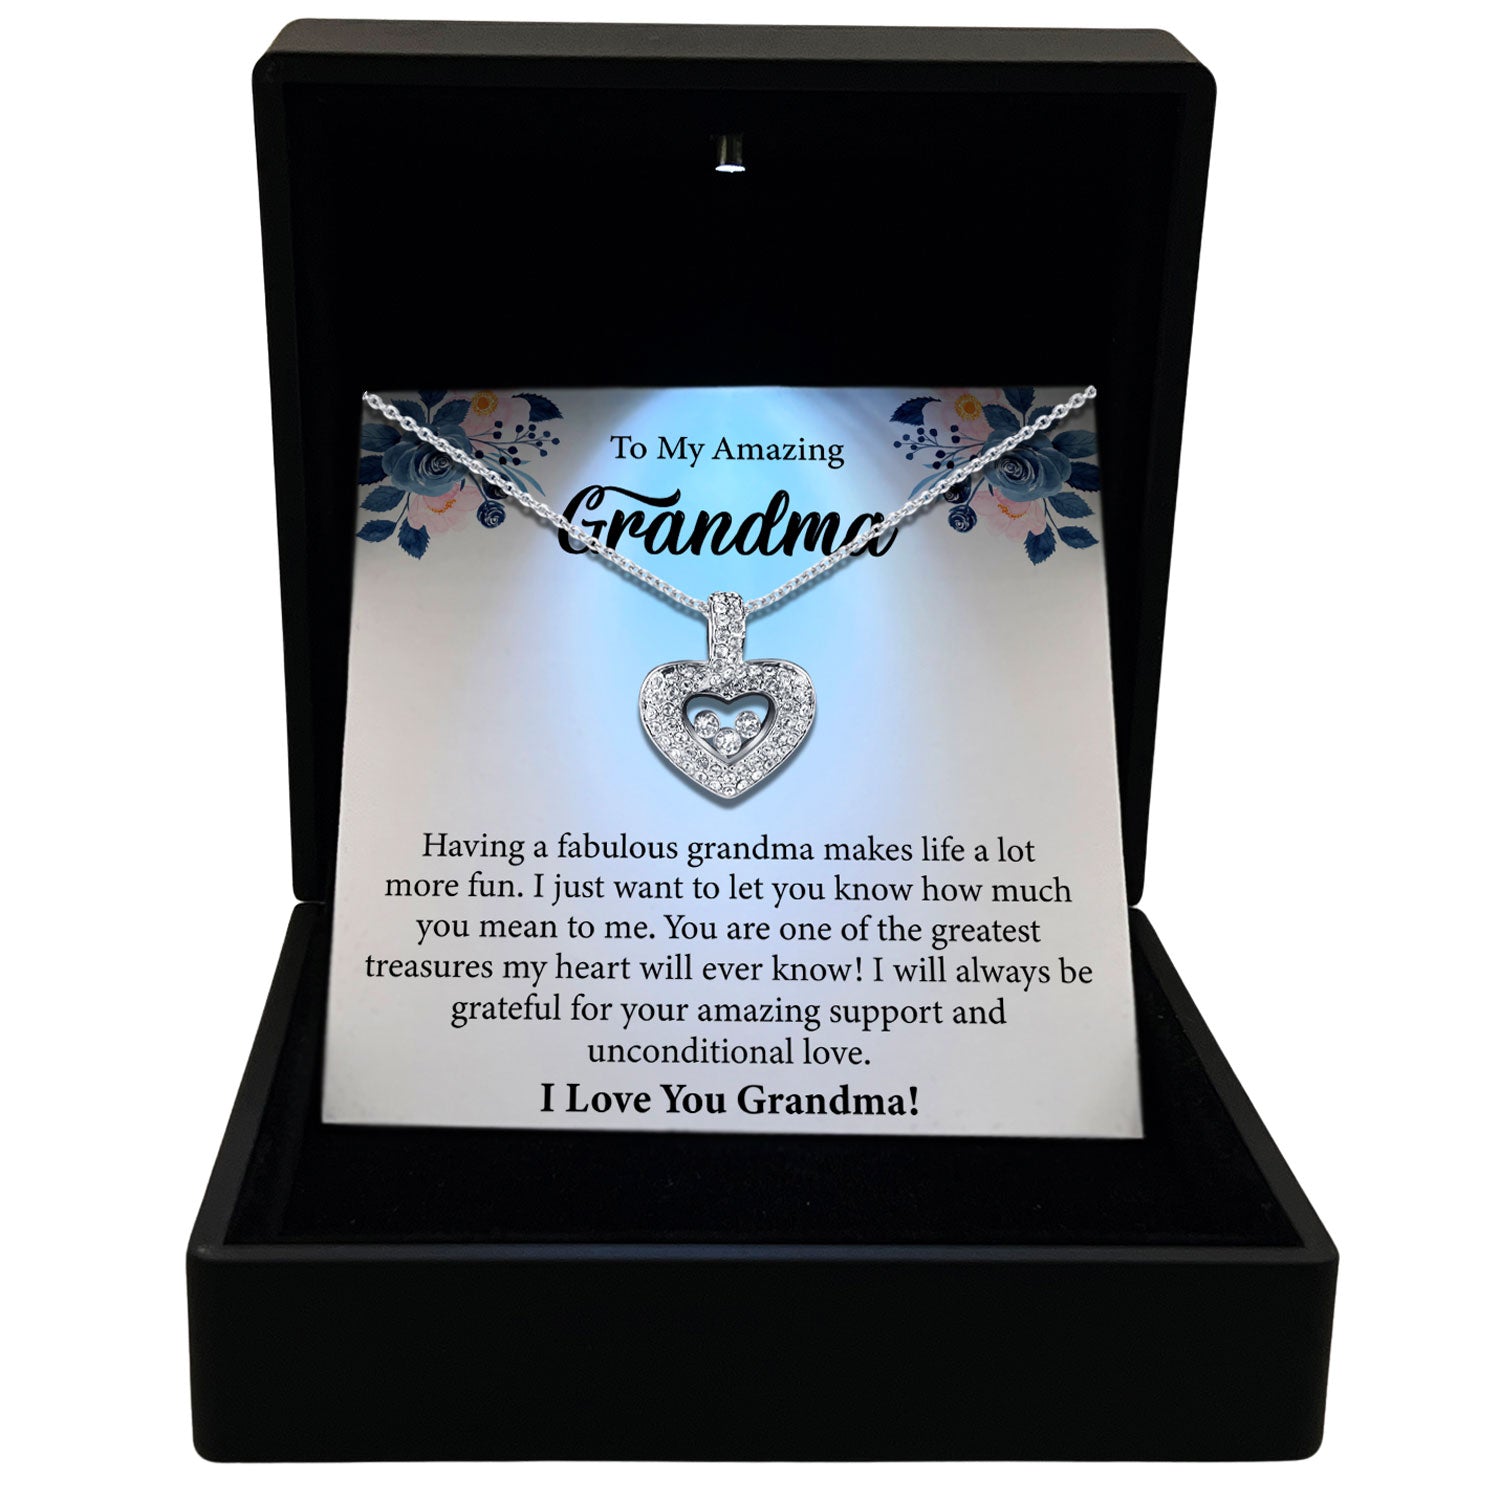 To My Amazing Grandma - Having A Fabulous Grandma Makes Life a Lot More Fun - Tryndi Floating Heart Necklace